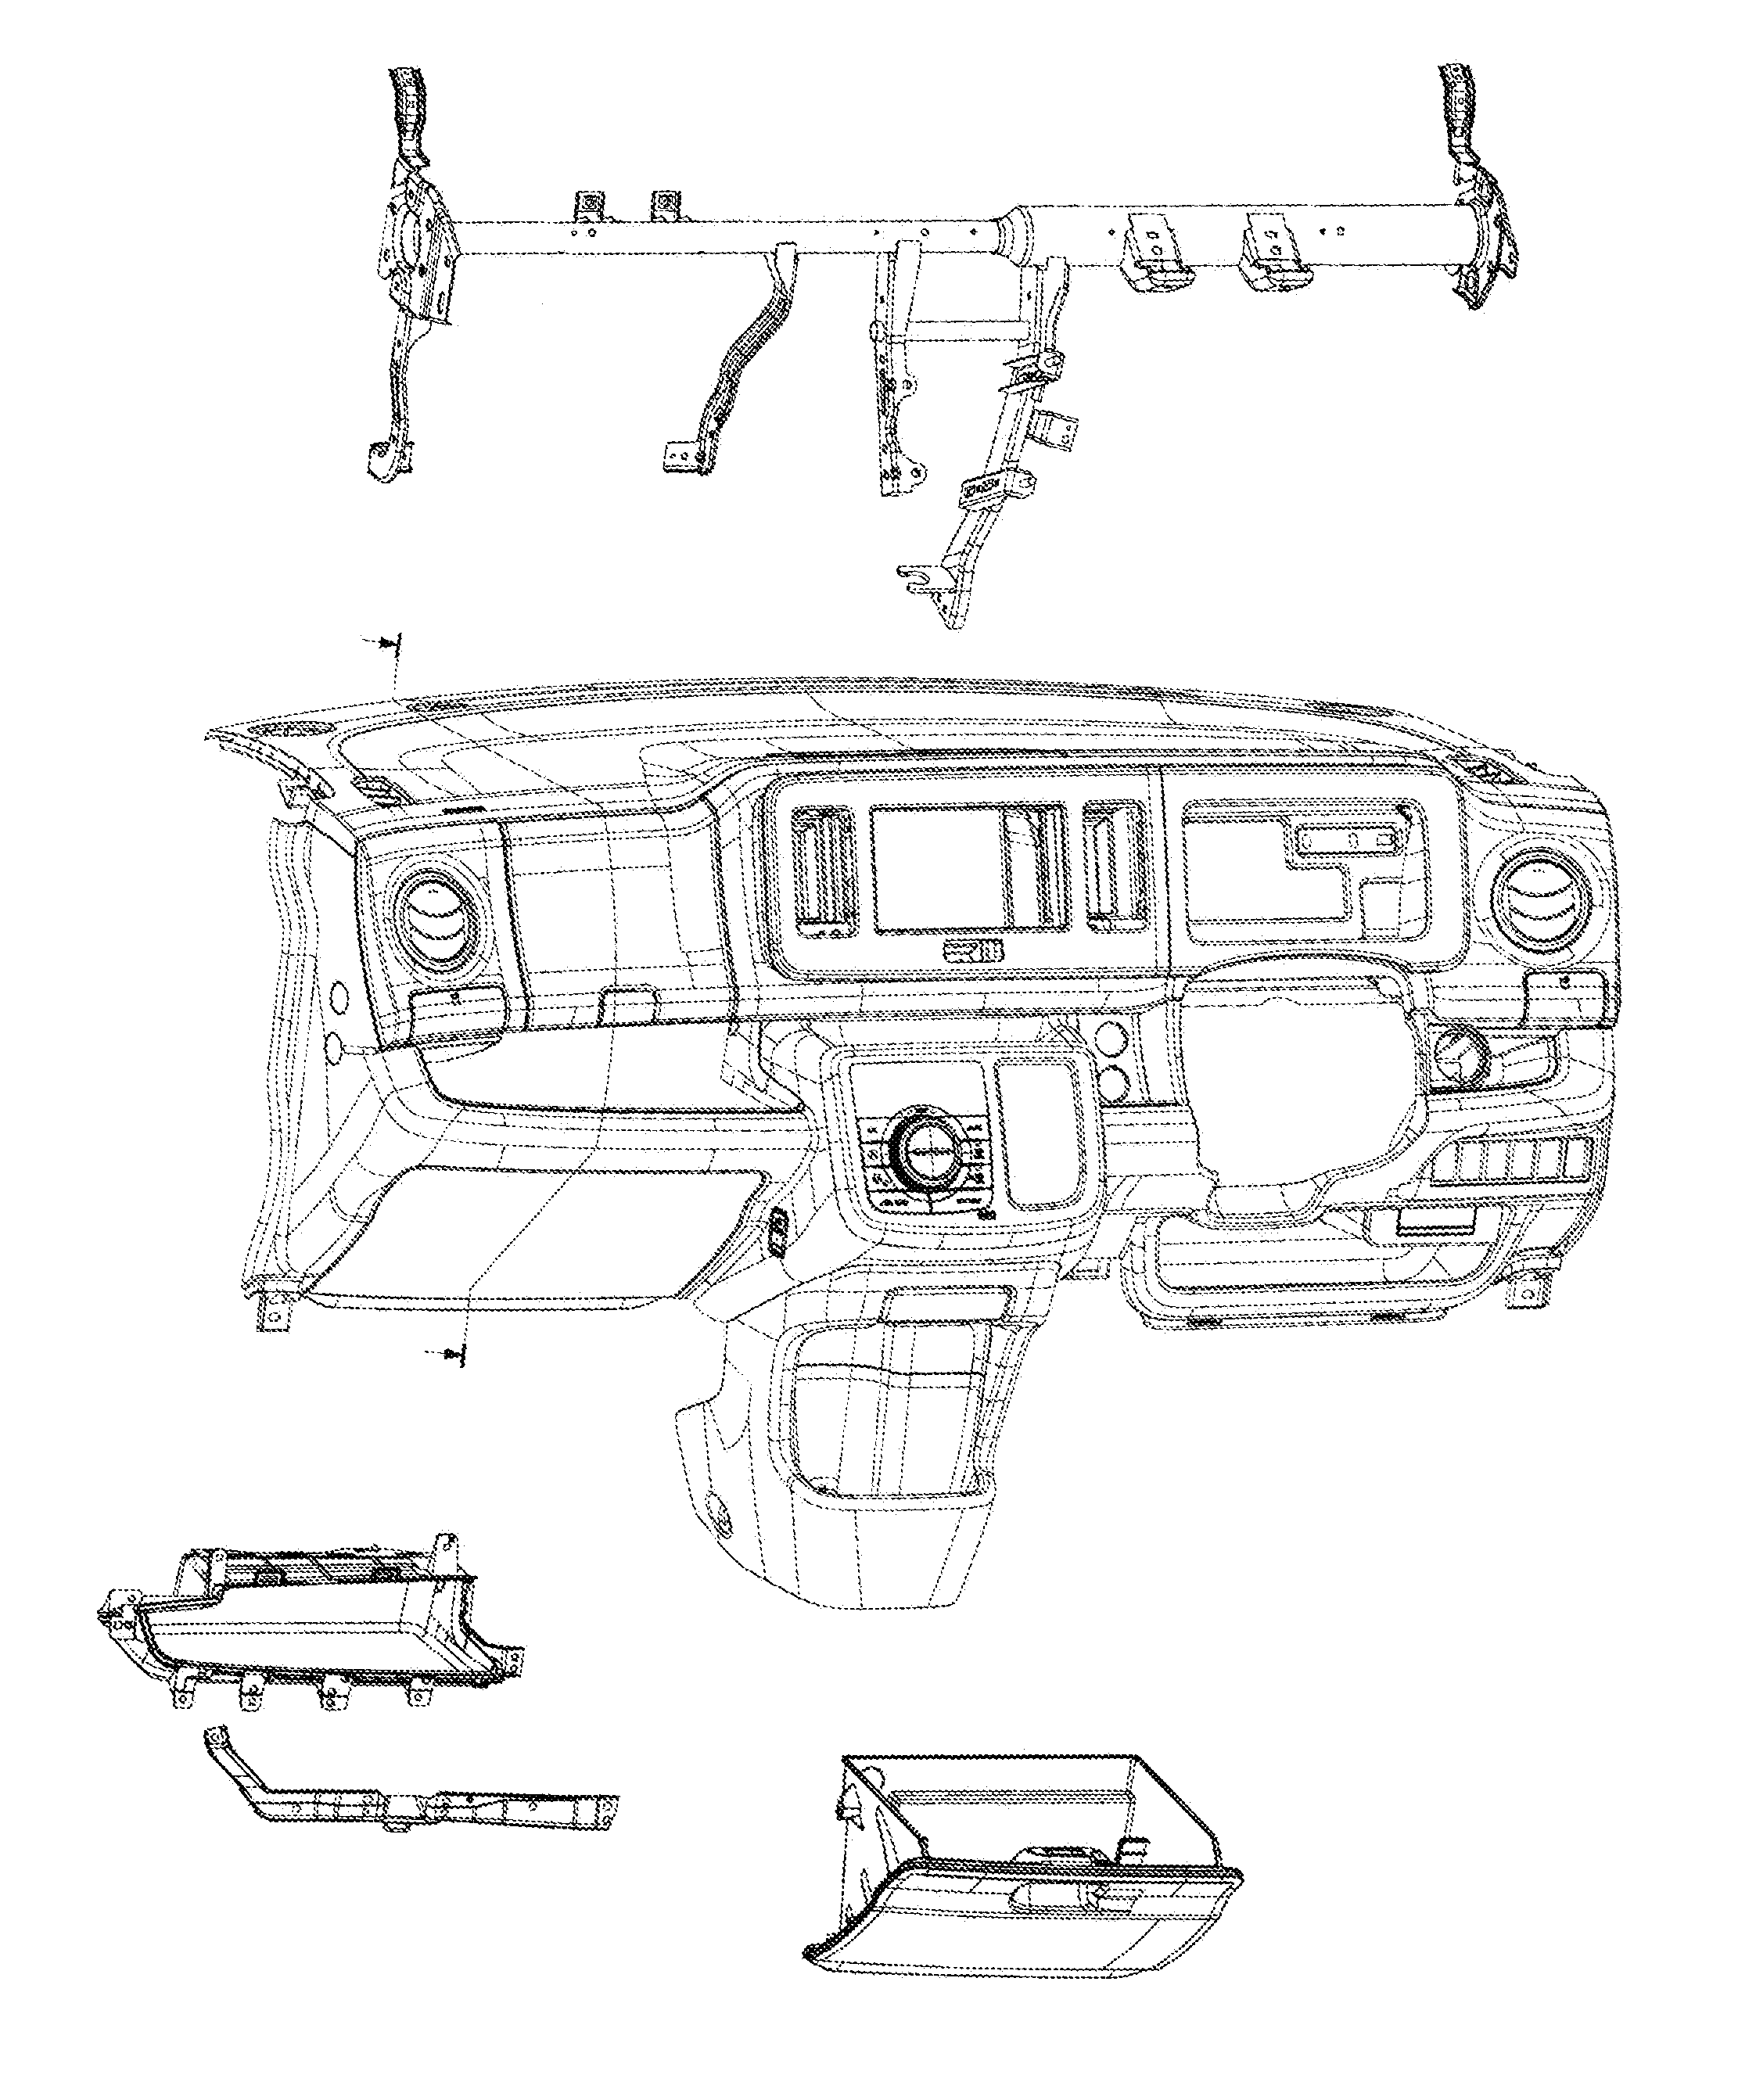 Structure of instrument panel parts